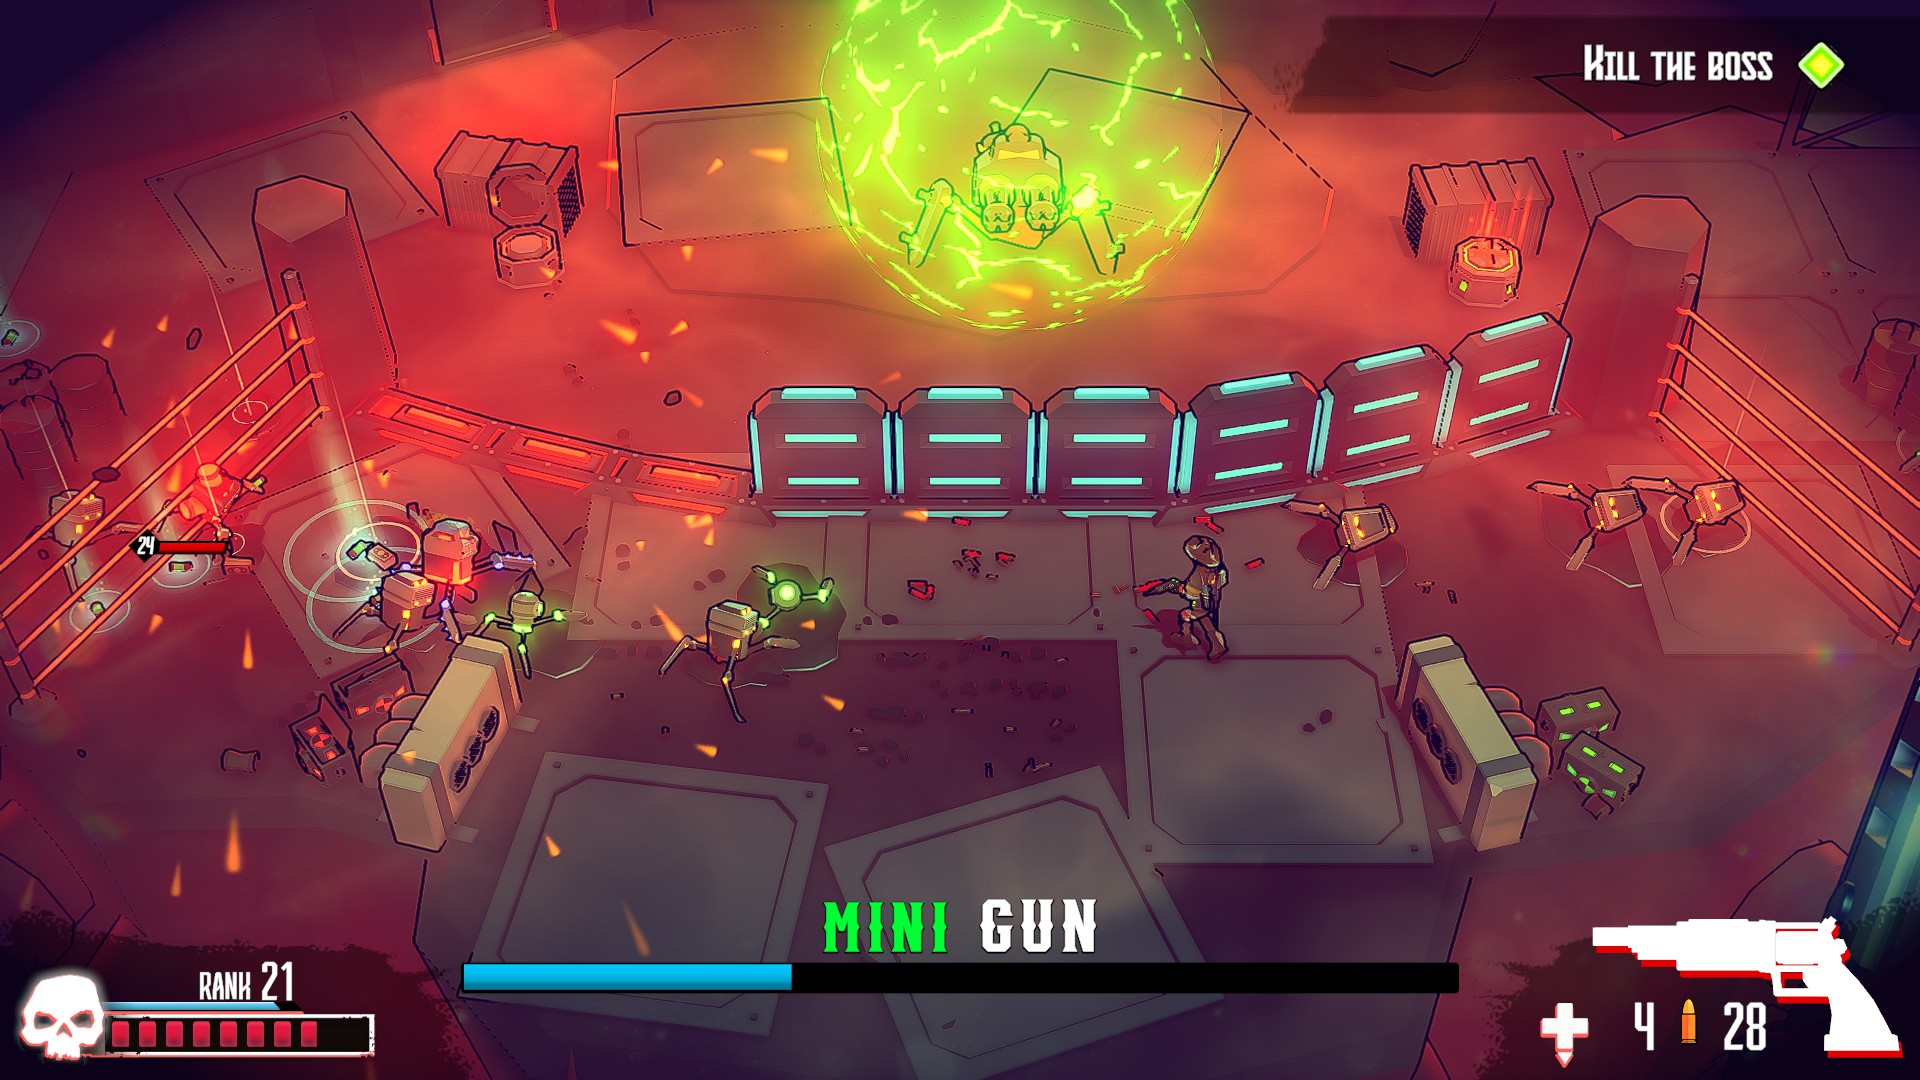 Mini Gun boss is protecting itself in a green sphere of energy, below it are a set of blue neon barricades. The Gunslinger is standing still as robot attack from each side with the small brightly lit one approaching from the left. shown below is the bosses health bar as well as the current gun equipped.